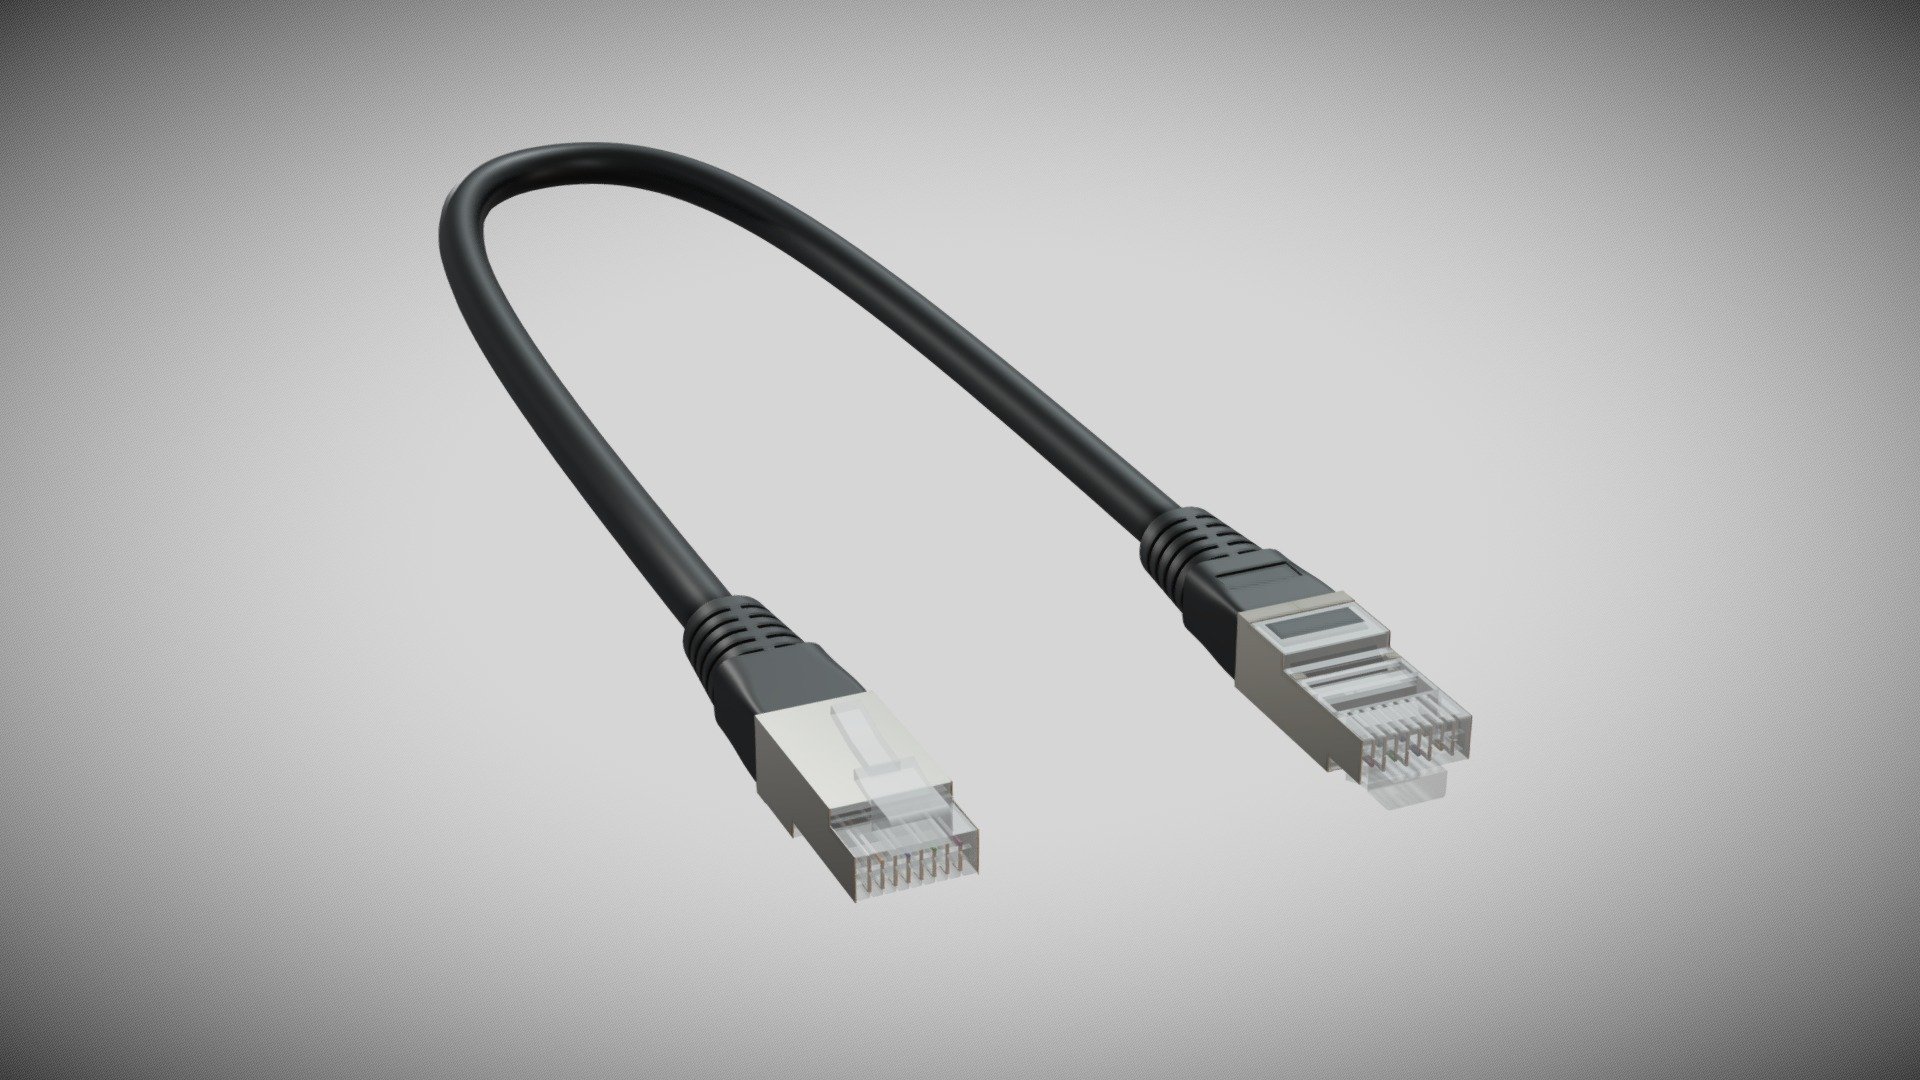 Ethernet connector modeled after real product, scale 1:1.
The transparent part of the connector is accurate and the interior with the colored cables can be seen if rendered in transparency.
Cable can be easily tweaked and customized for renders 3d model